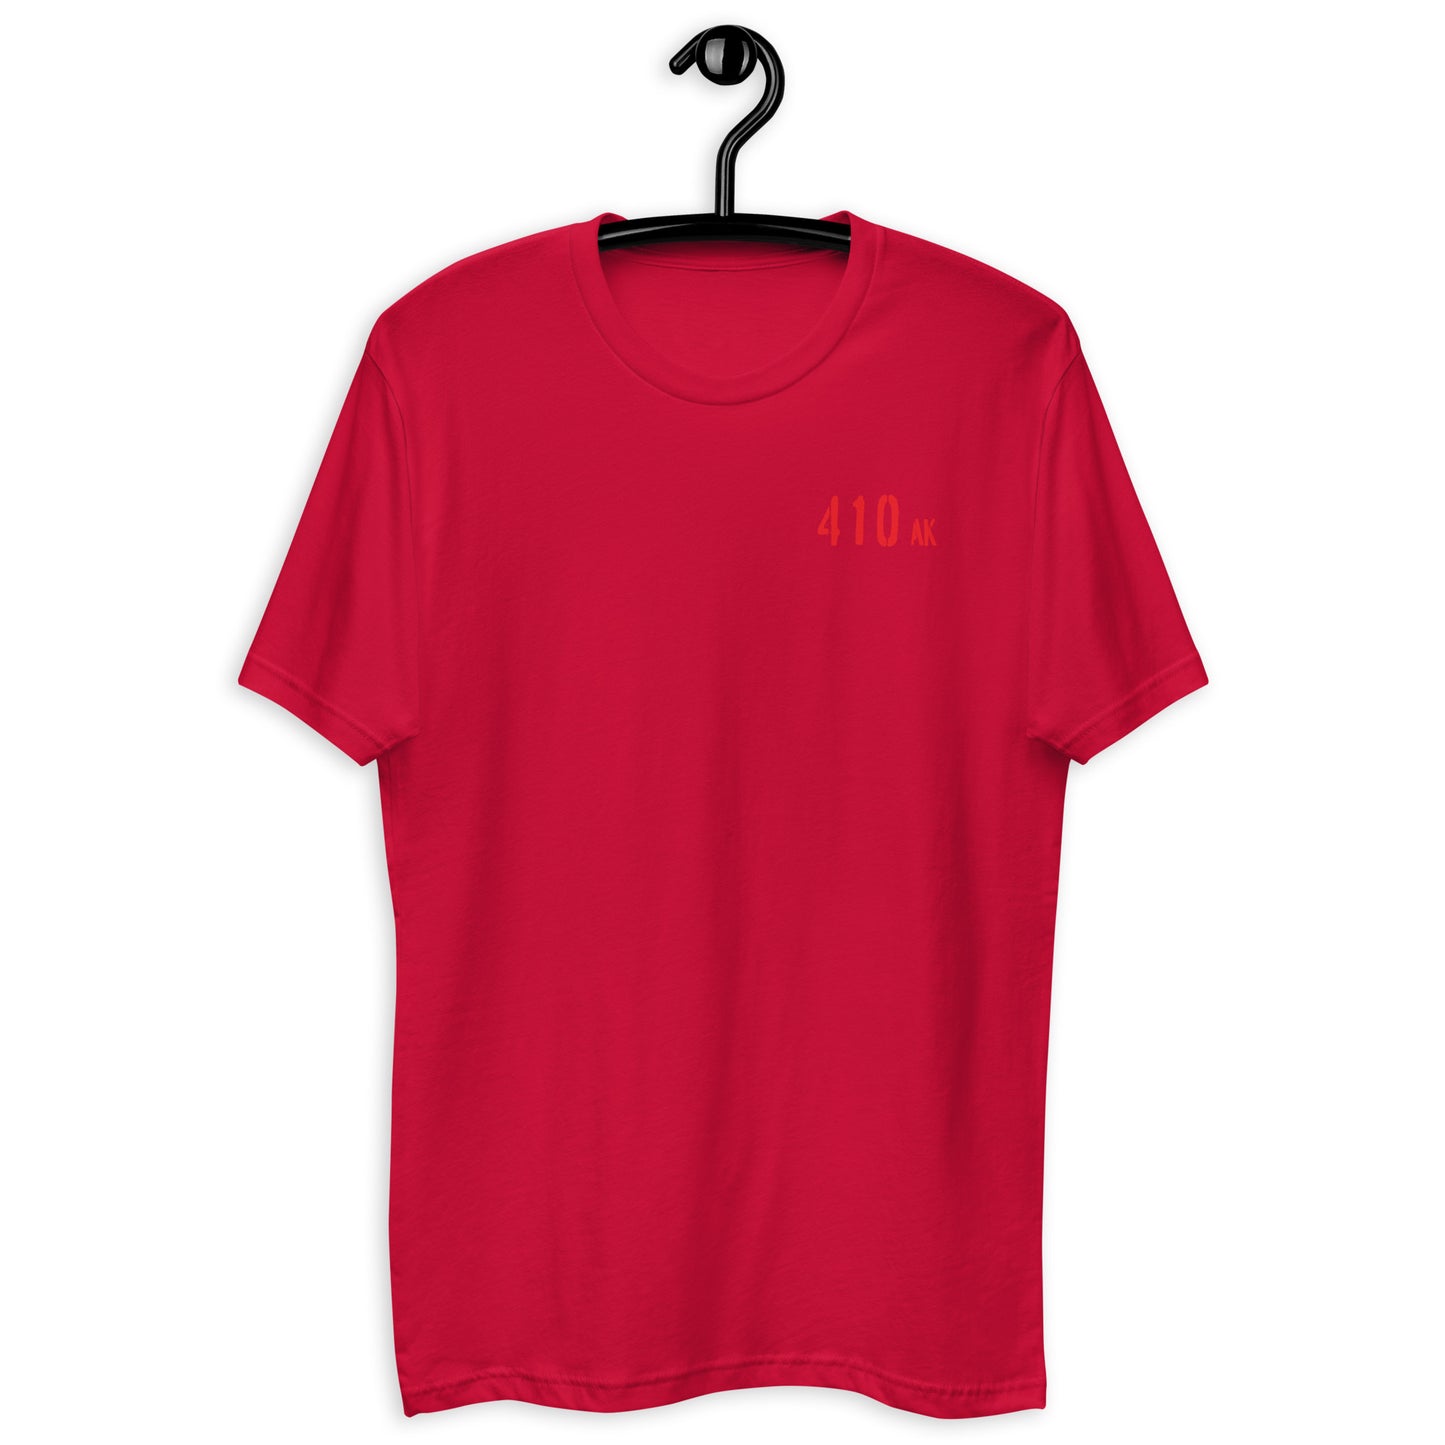 M| 410 Tee (red)